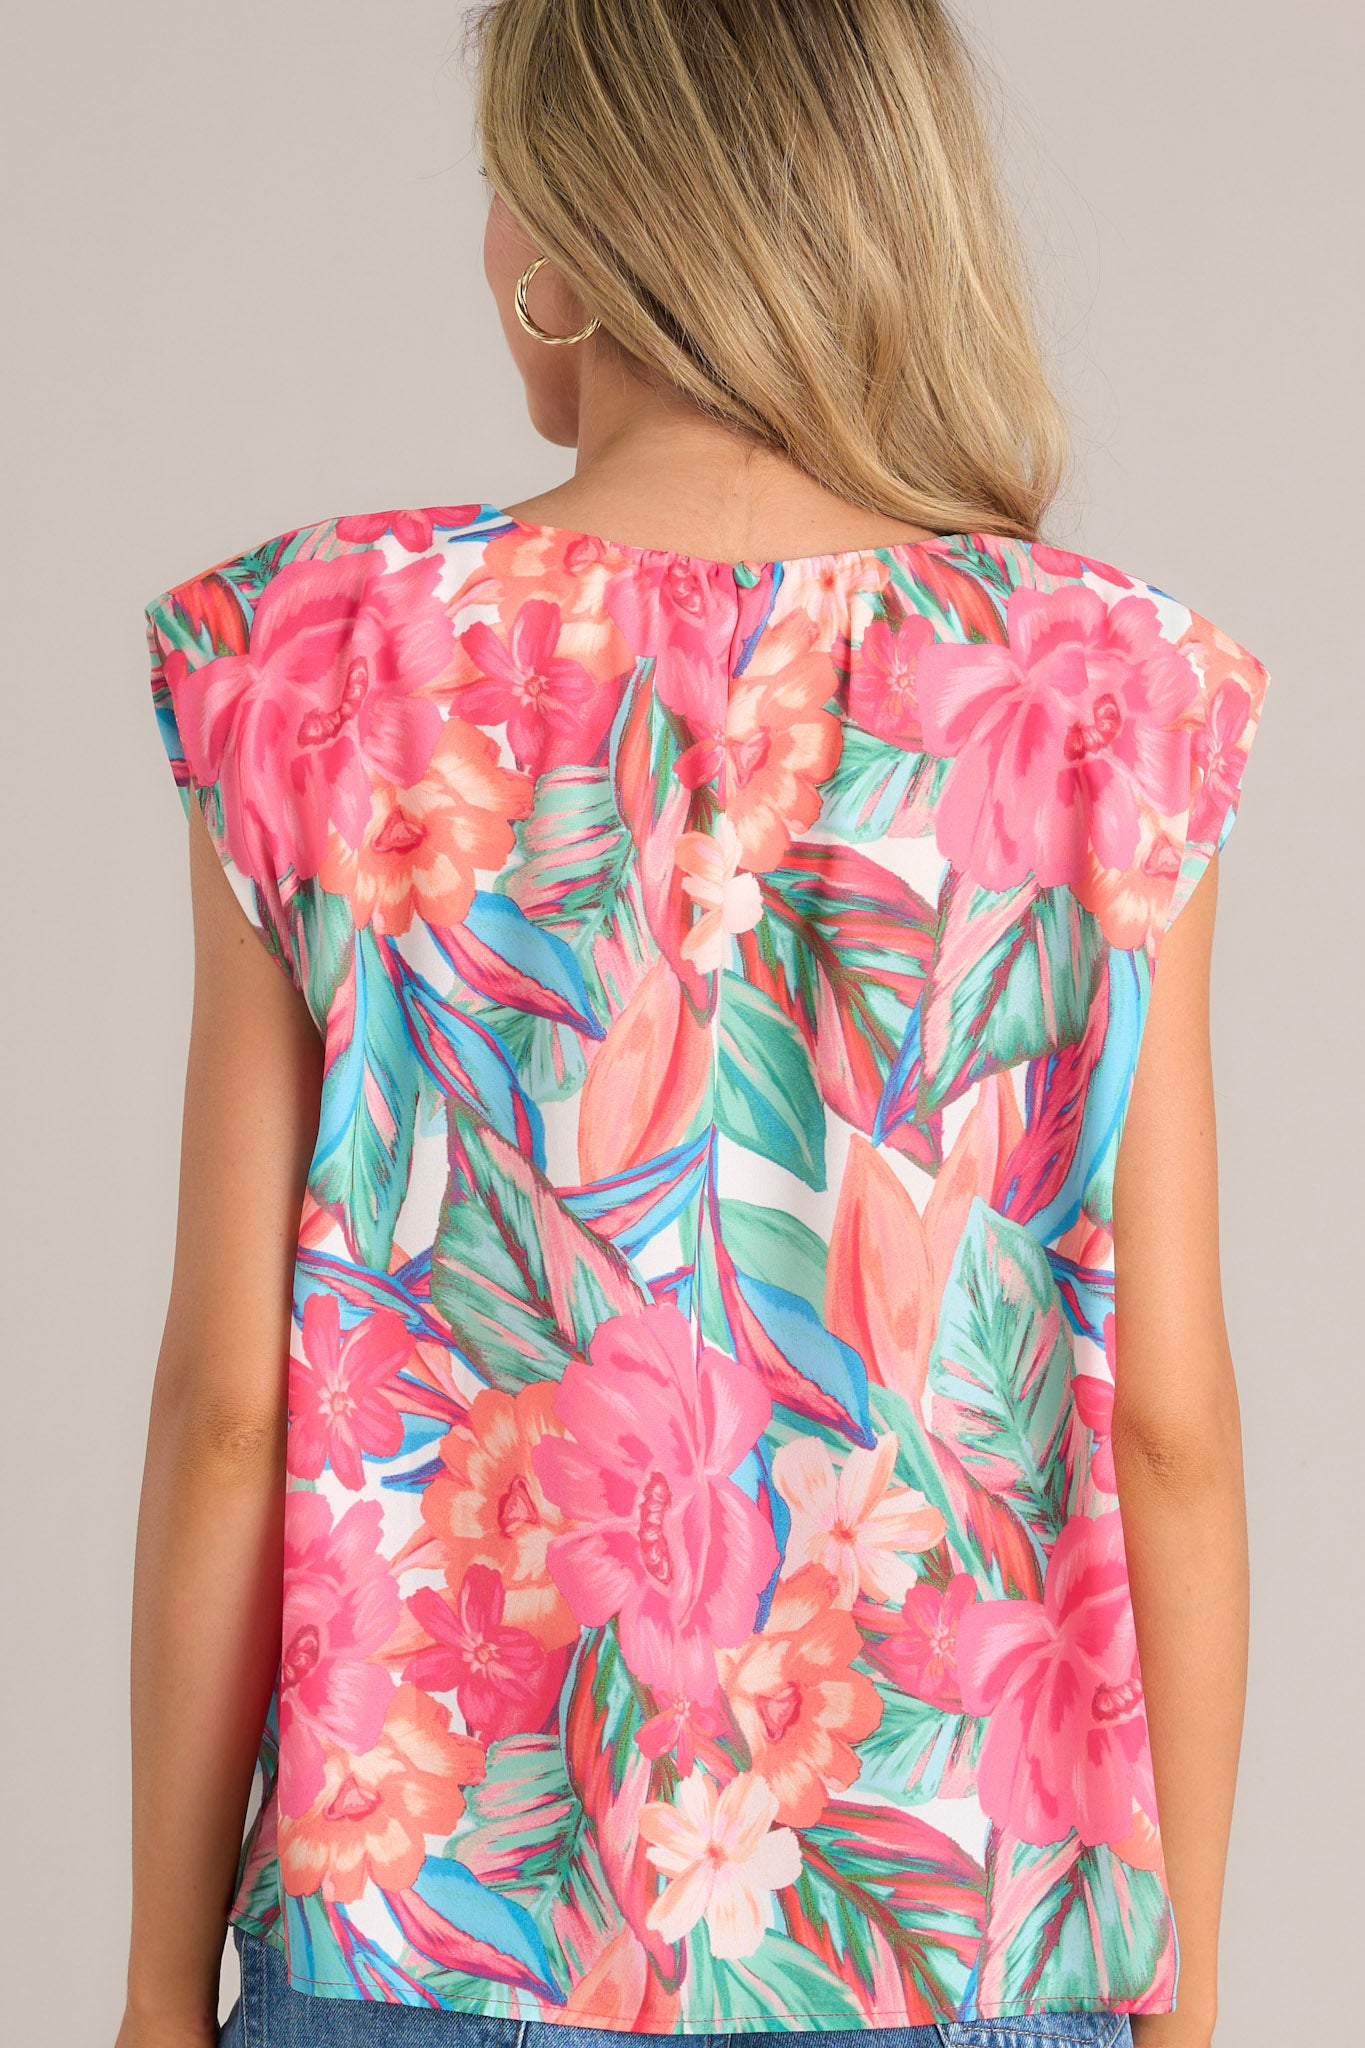 Back view of this hot pink floral top that features a crew neckline, shoulder padding, wide short sleeves, and a tropical floral print.